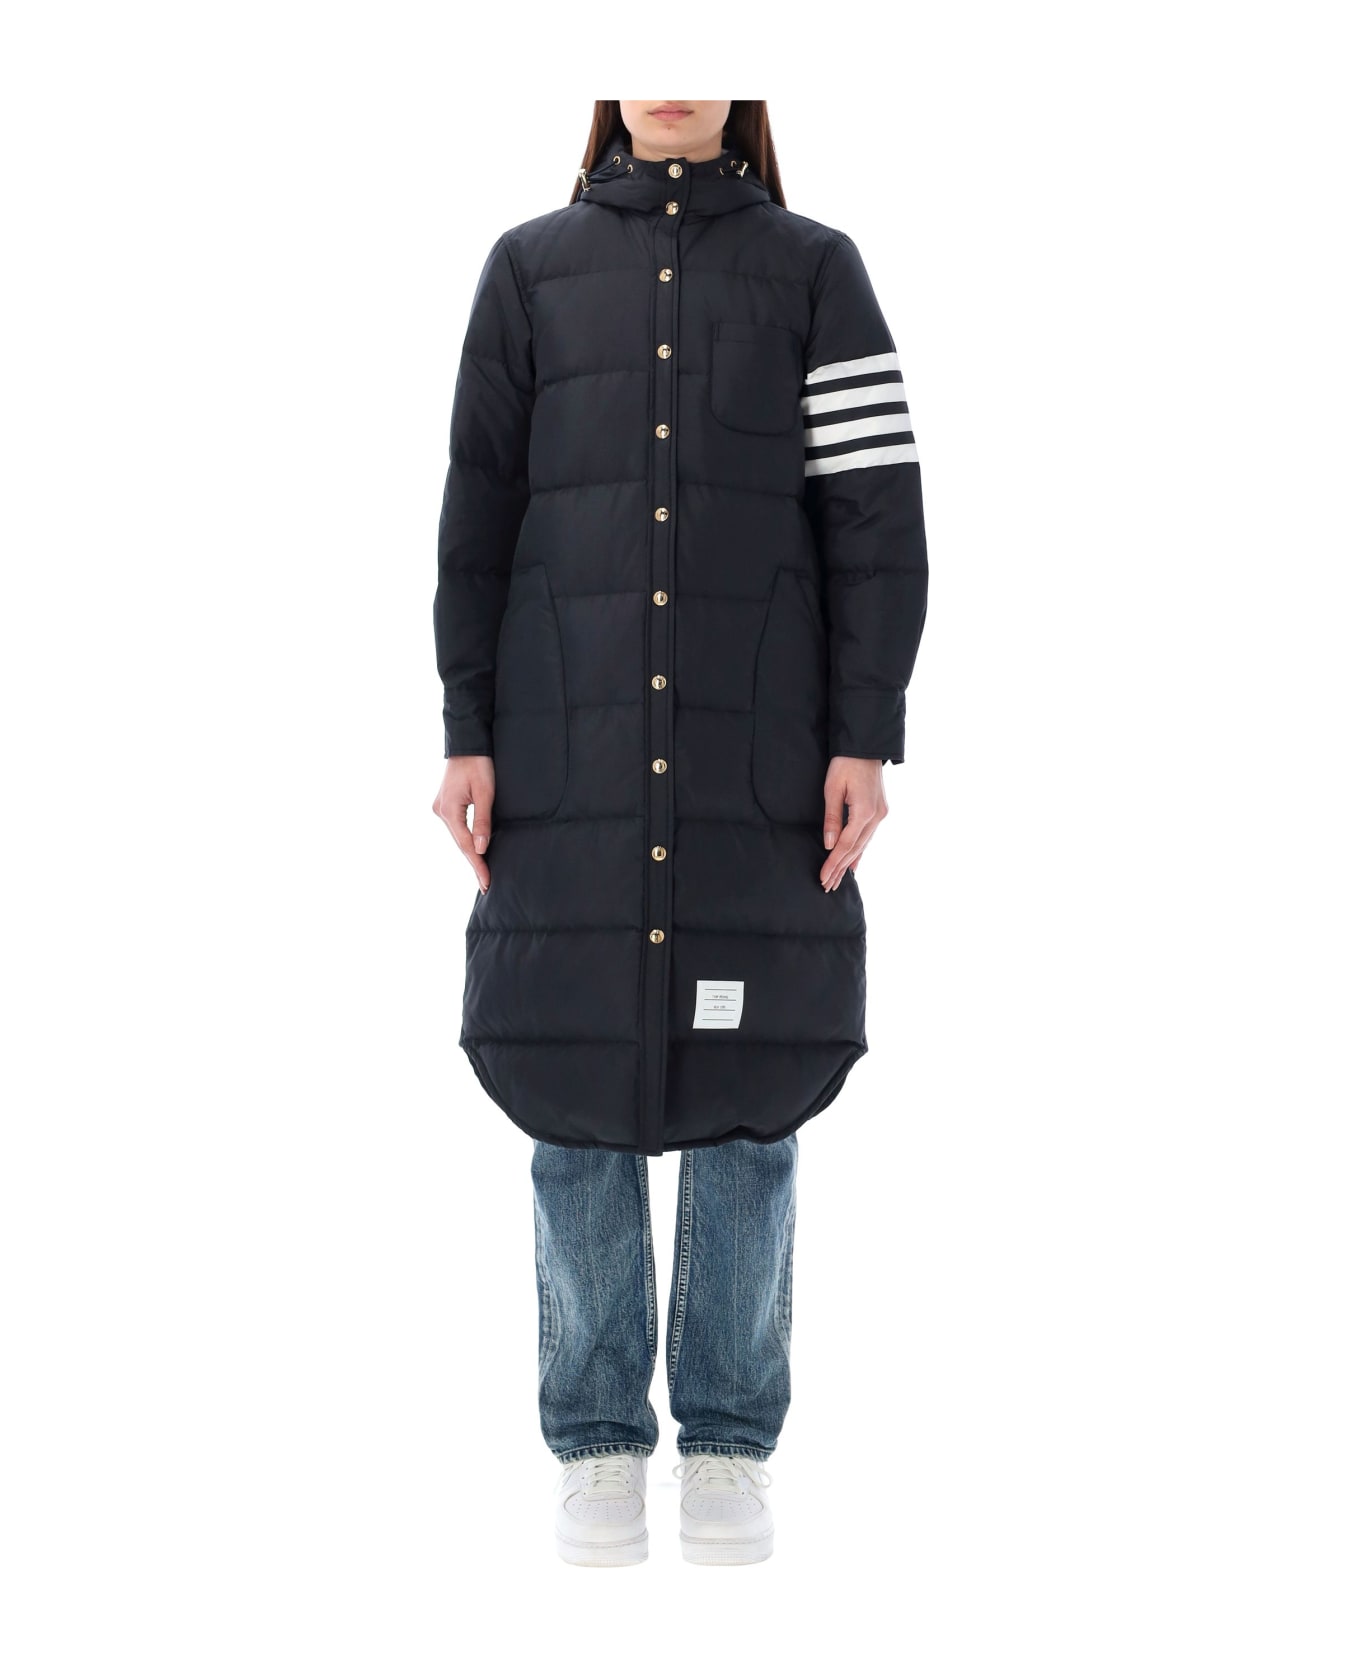 Thom Browne Downfilled Ripstop 4-bar Hooded Jacket - NAVY